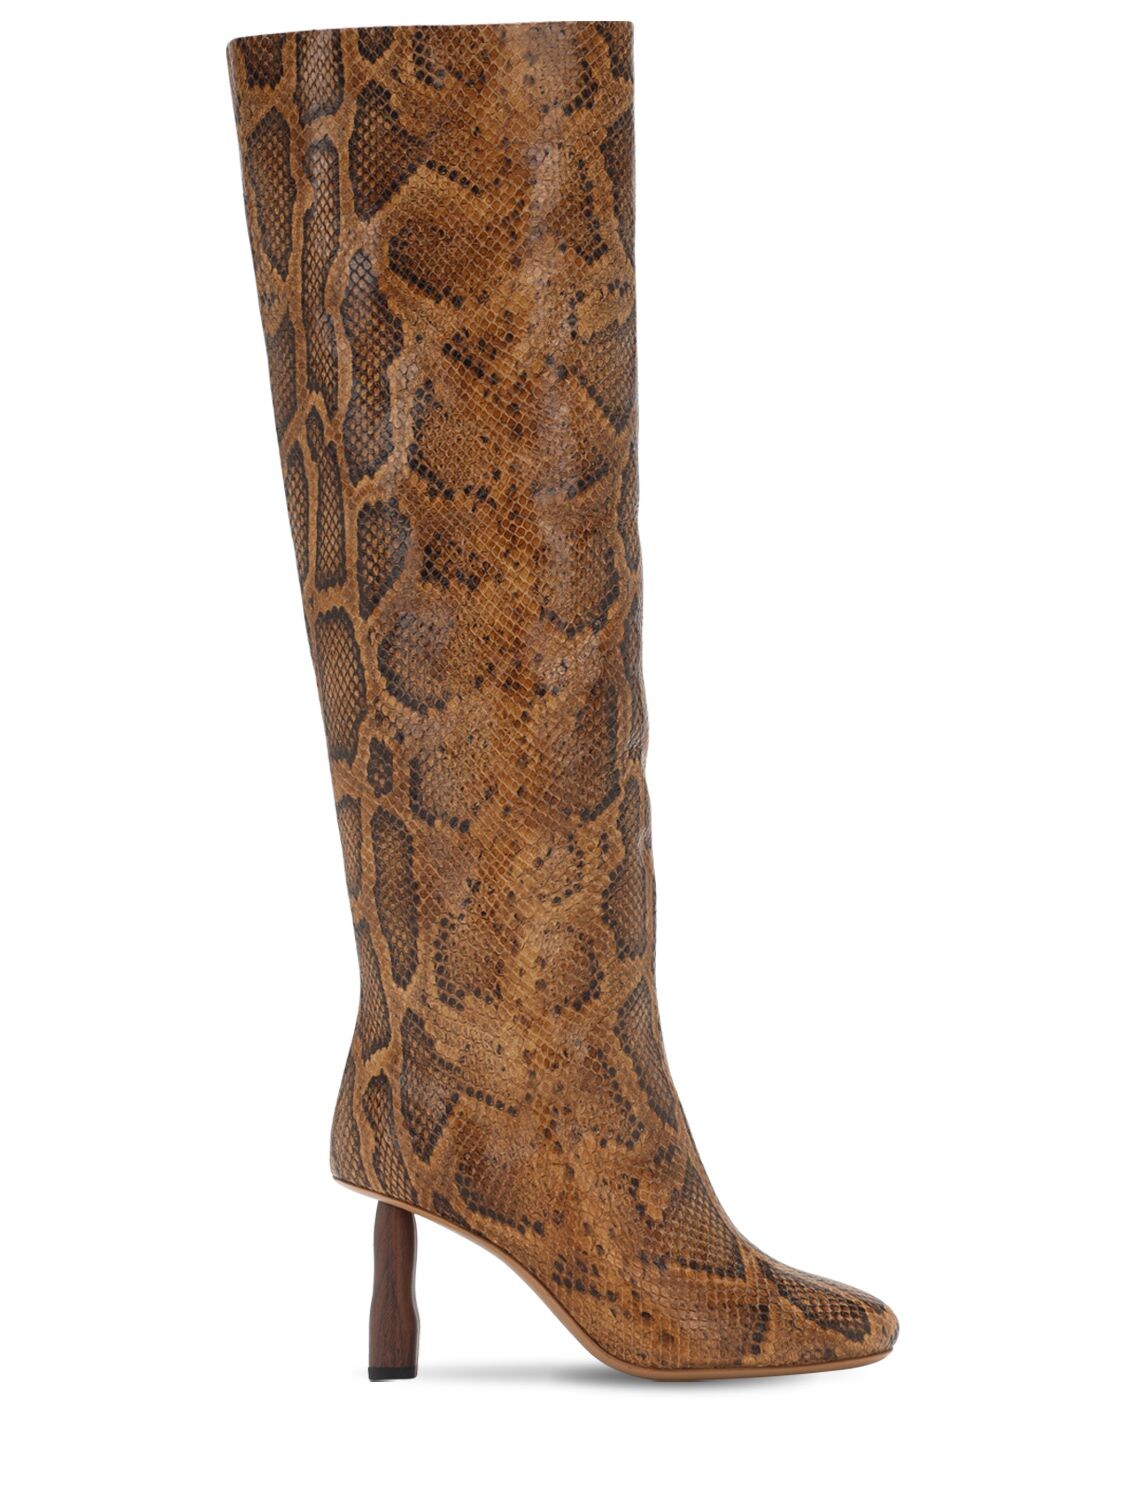 80mm Snake Print Leather Tall Boots